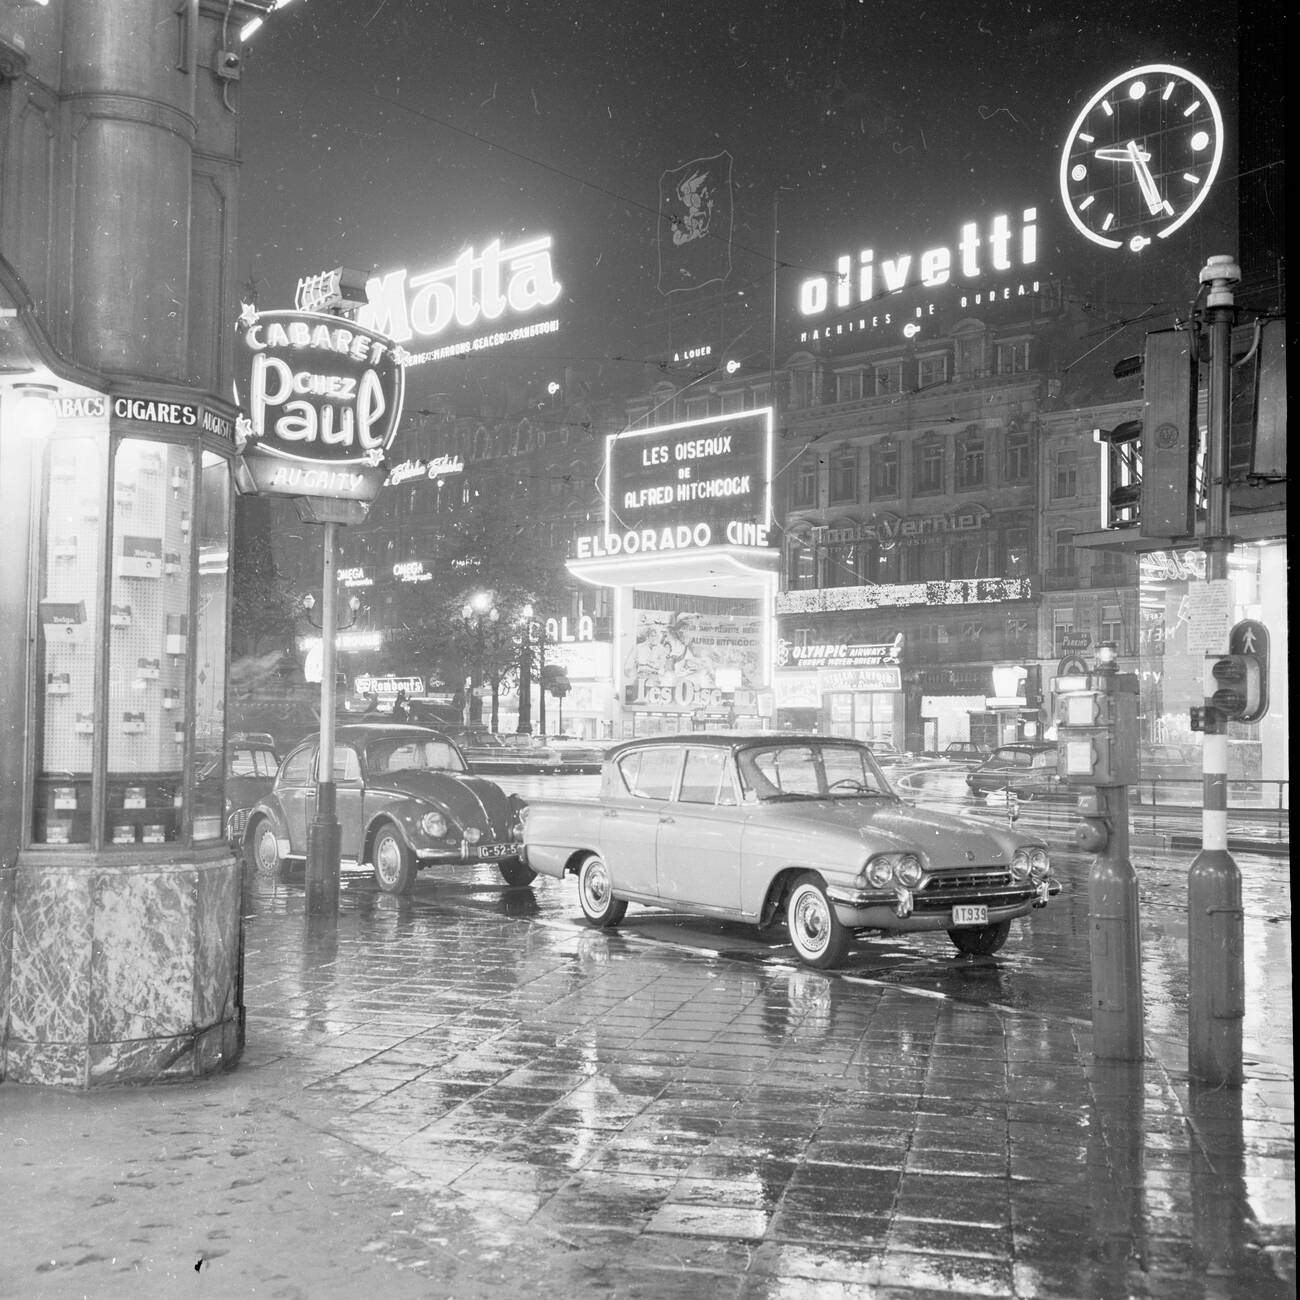 A wet street, evening time Brussels, Belgium, lit up by advertising hoardings and signs, 1950s